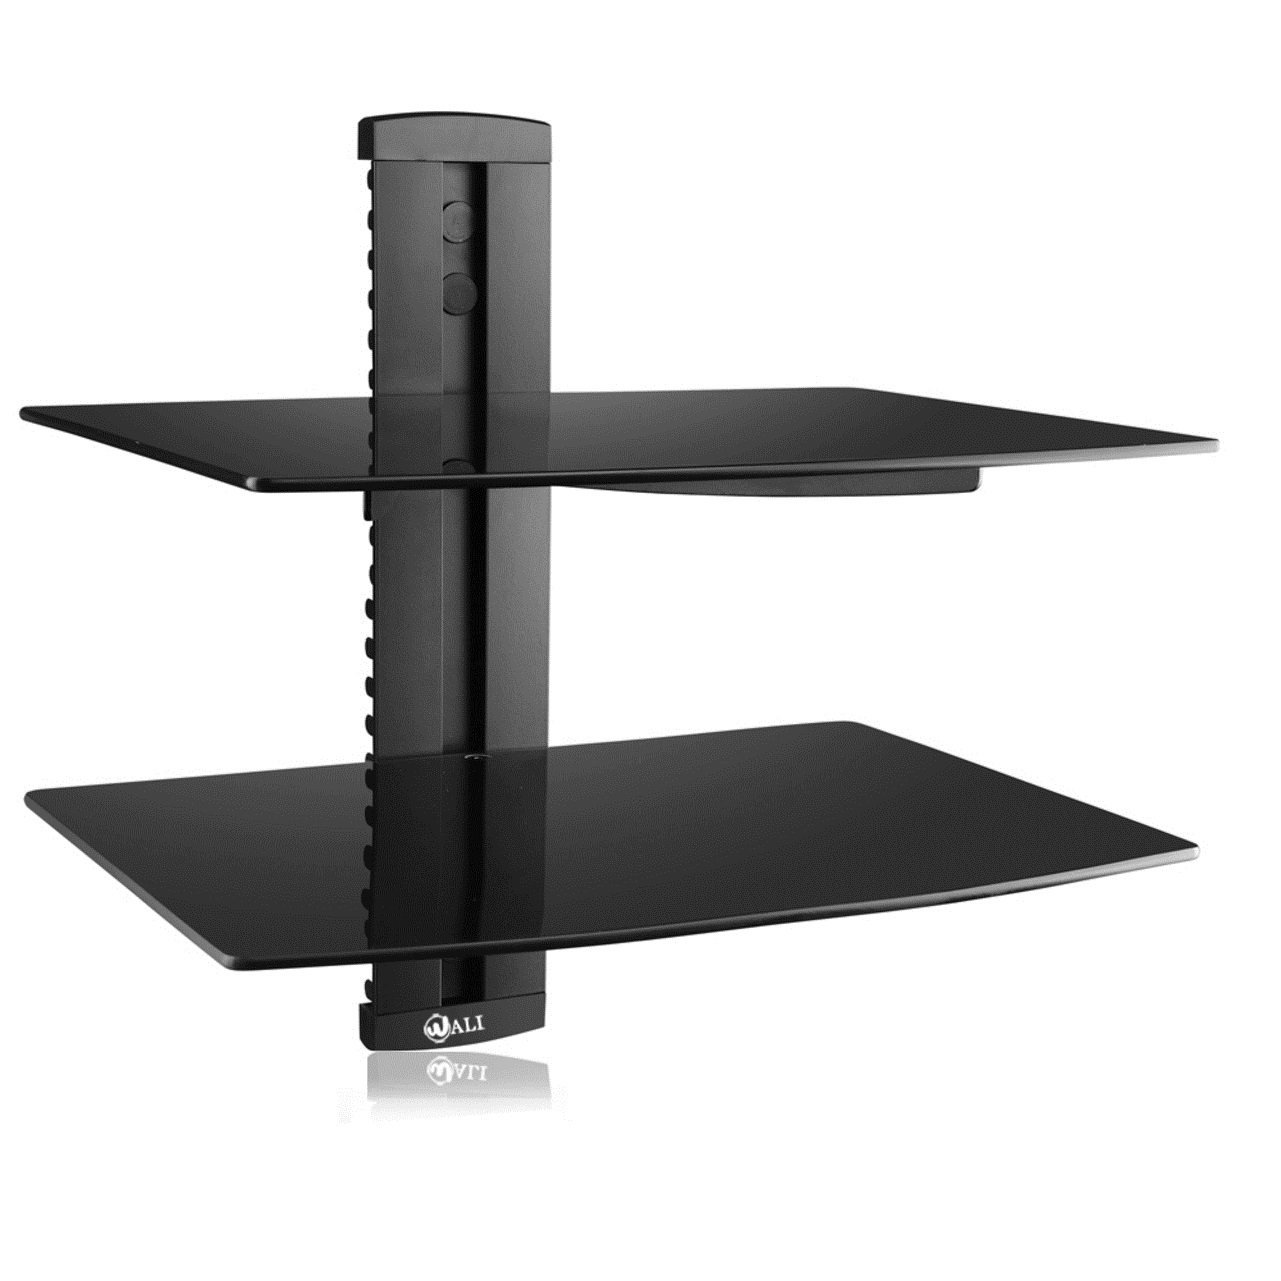 WALI Floating Shelf with Strengthened Tempered Glass for DVD Players/Cable Boxes/Games Consoles/TV Accessories, 2 Shelf, Black